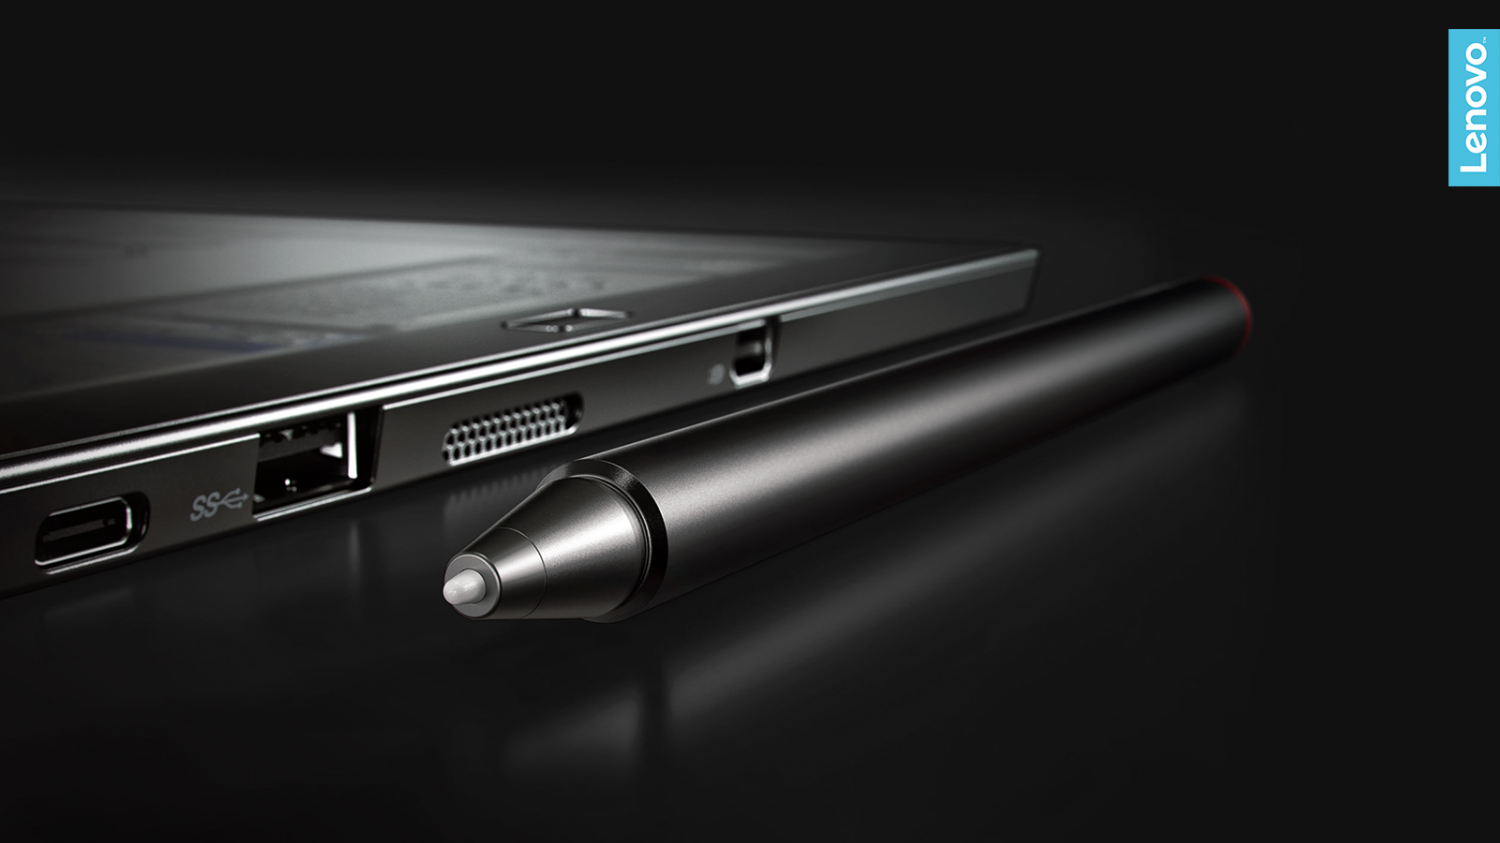 The Lenovo Flex 14 Offers Great Value for a 2-in-1 Convertible Laptop, perfect for the professional on-the-go.